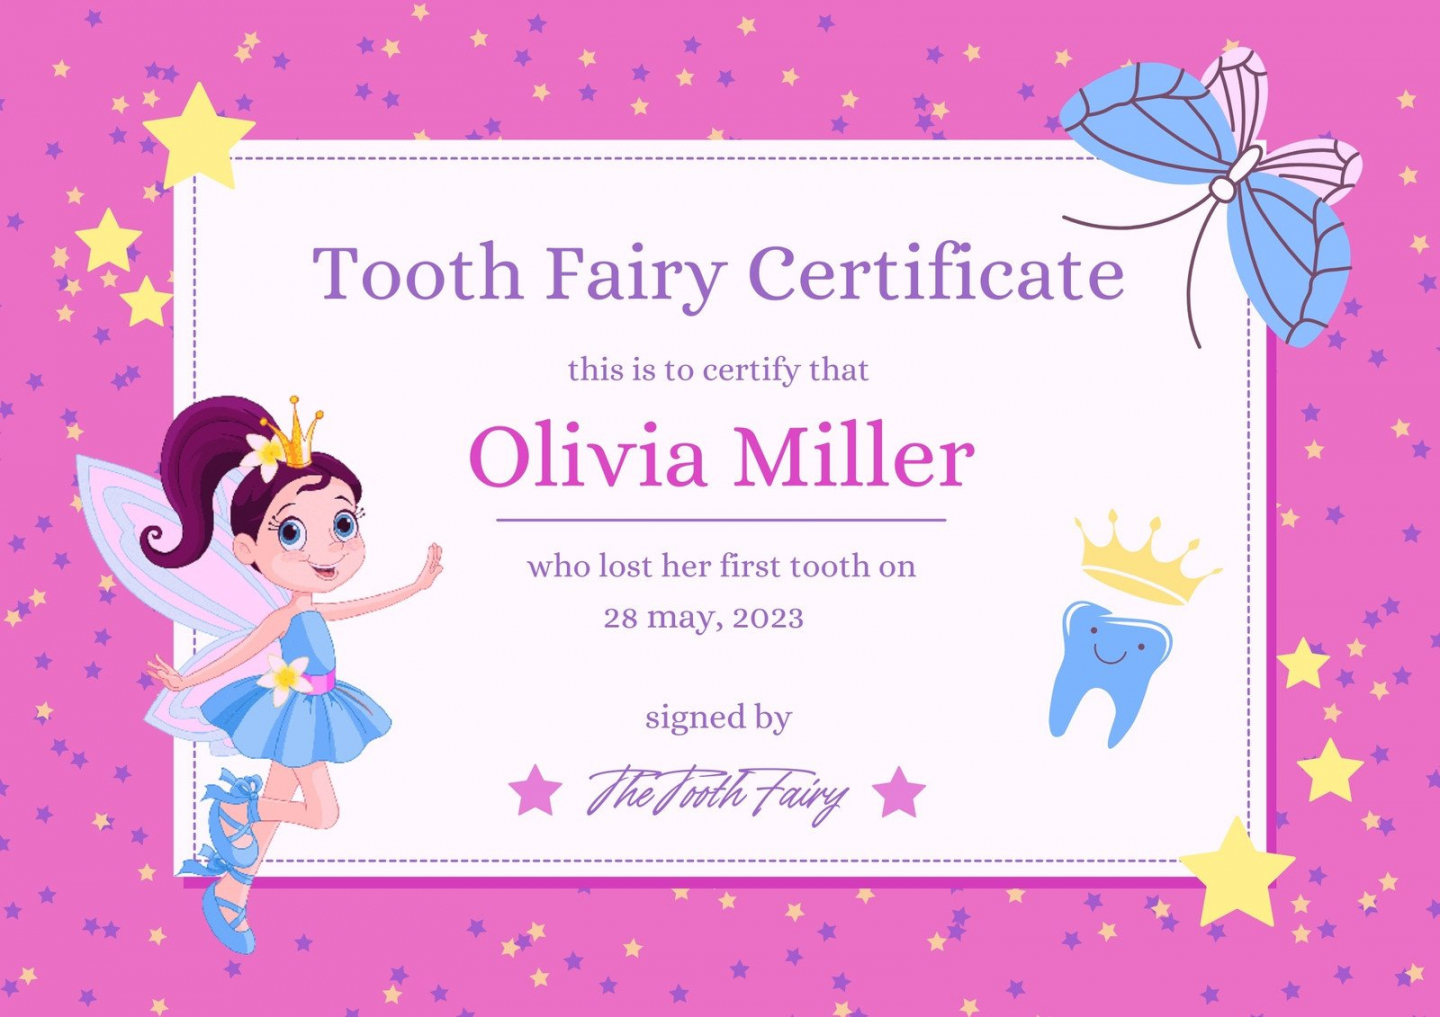 Free customizable tooth fairy certificate templates  Canva - FREE Printables - Free Printable Tooth Fairy Letter